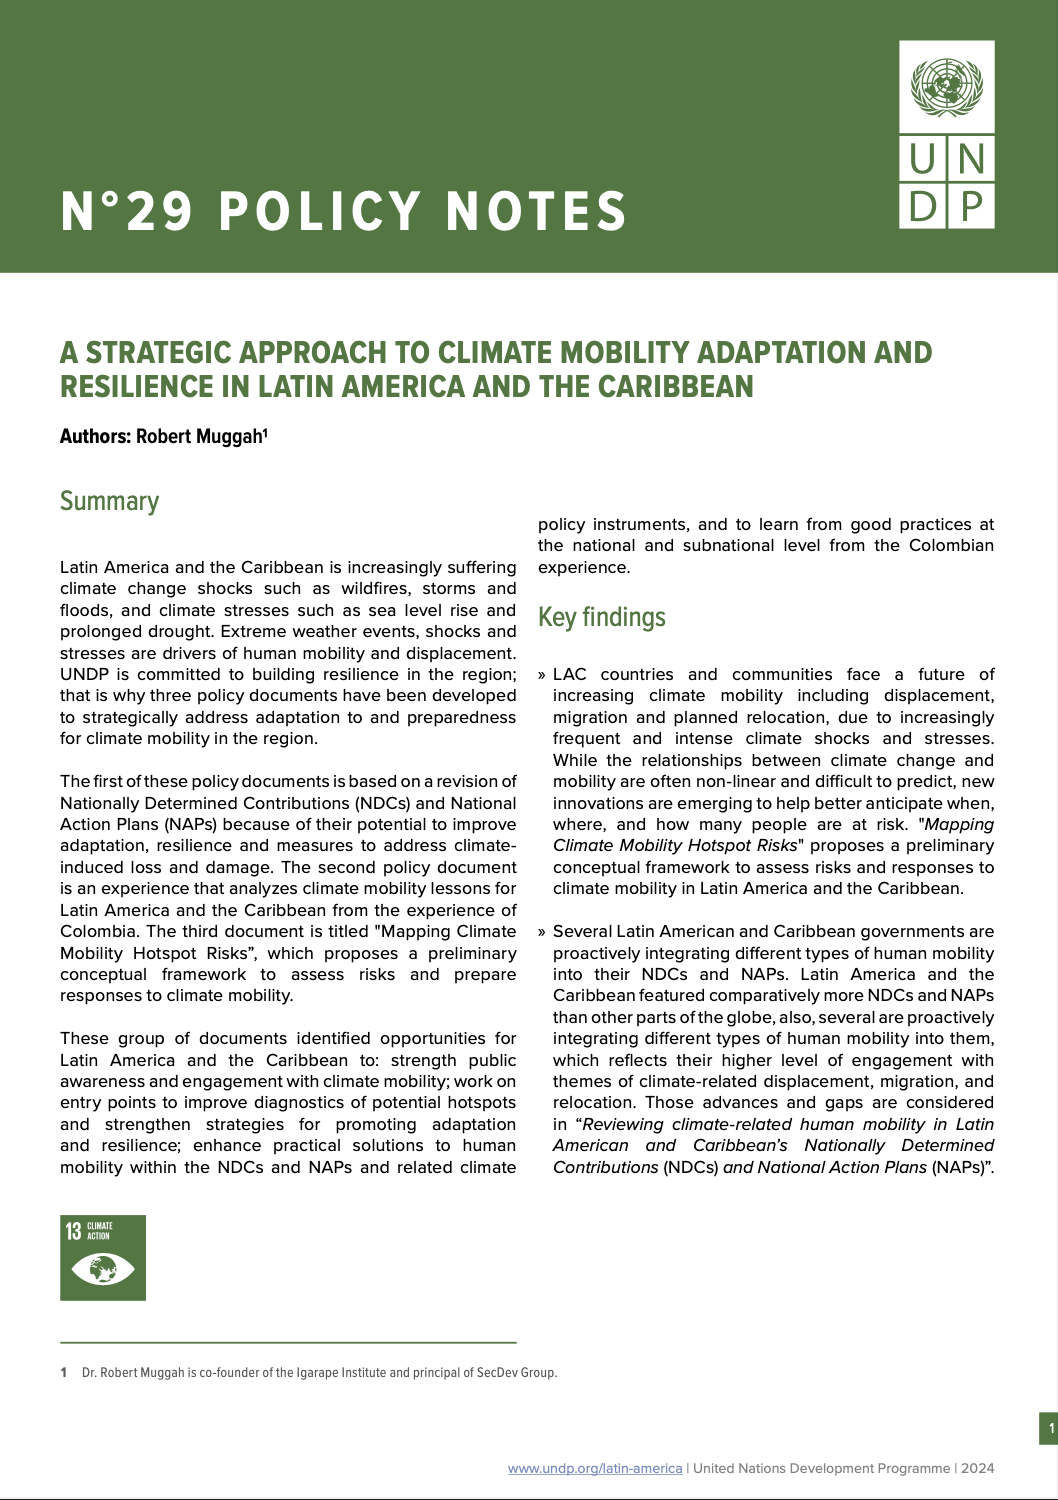 A Strategic Approach to Climate Mobility Adaptation and Resilience in Latin America and the Caribbean